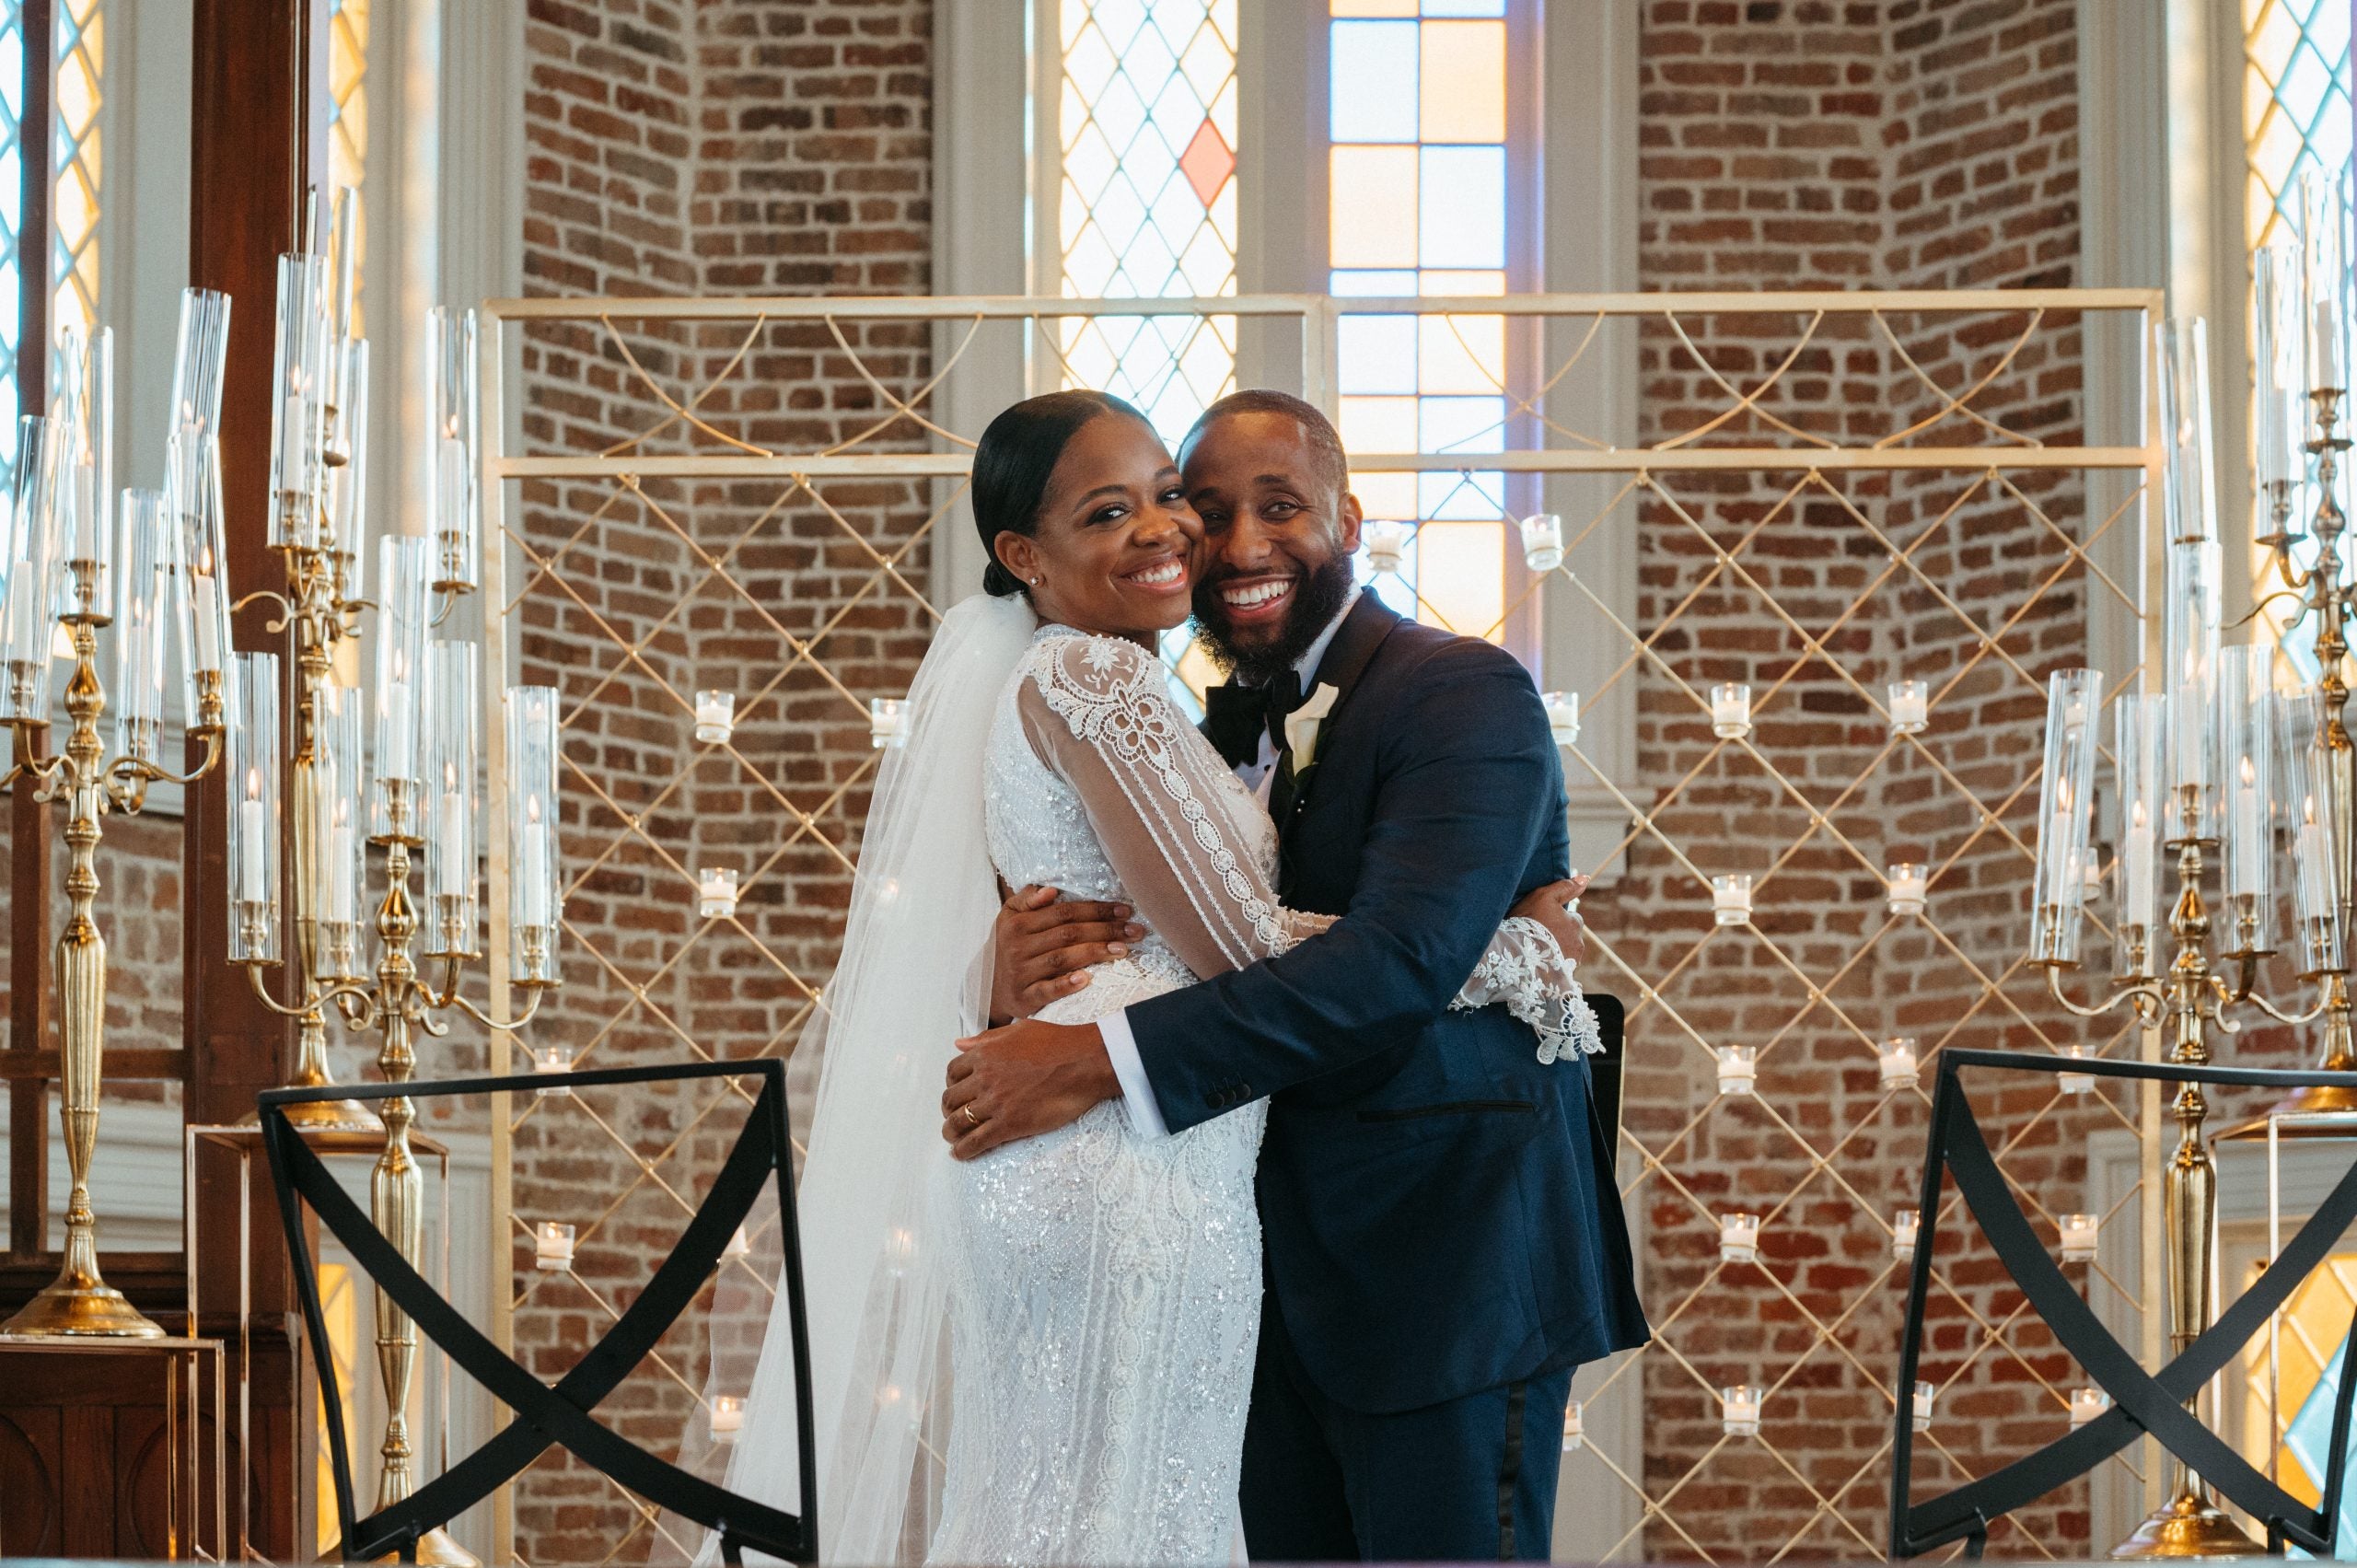 Heather And Drew's Nuptials Mixed New Orleans Charm With Brooklyn Swag